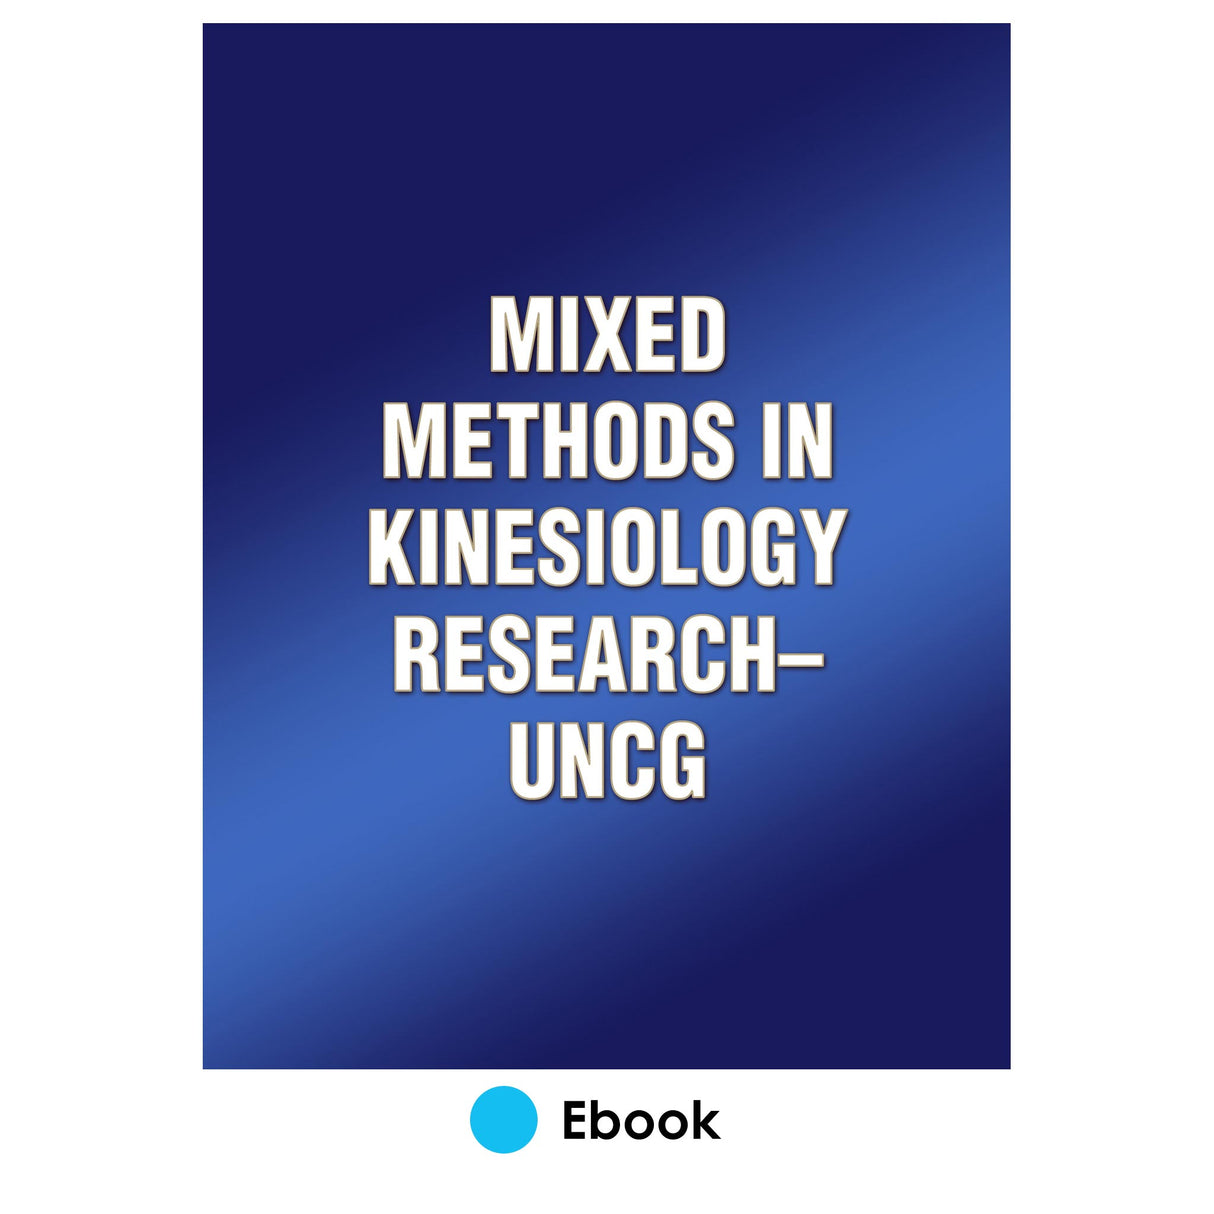 Mixed Methods in Kinesiology Research-UNCG